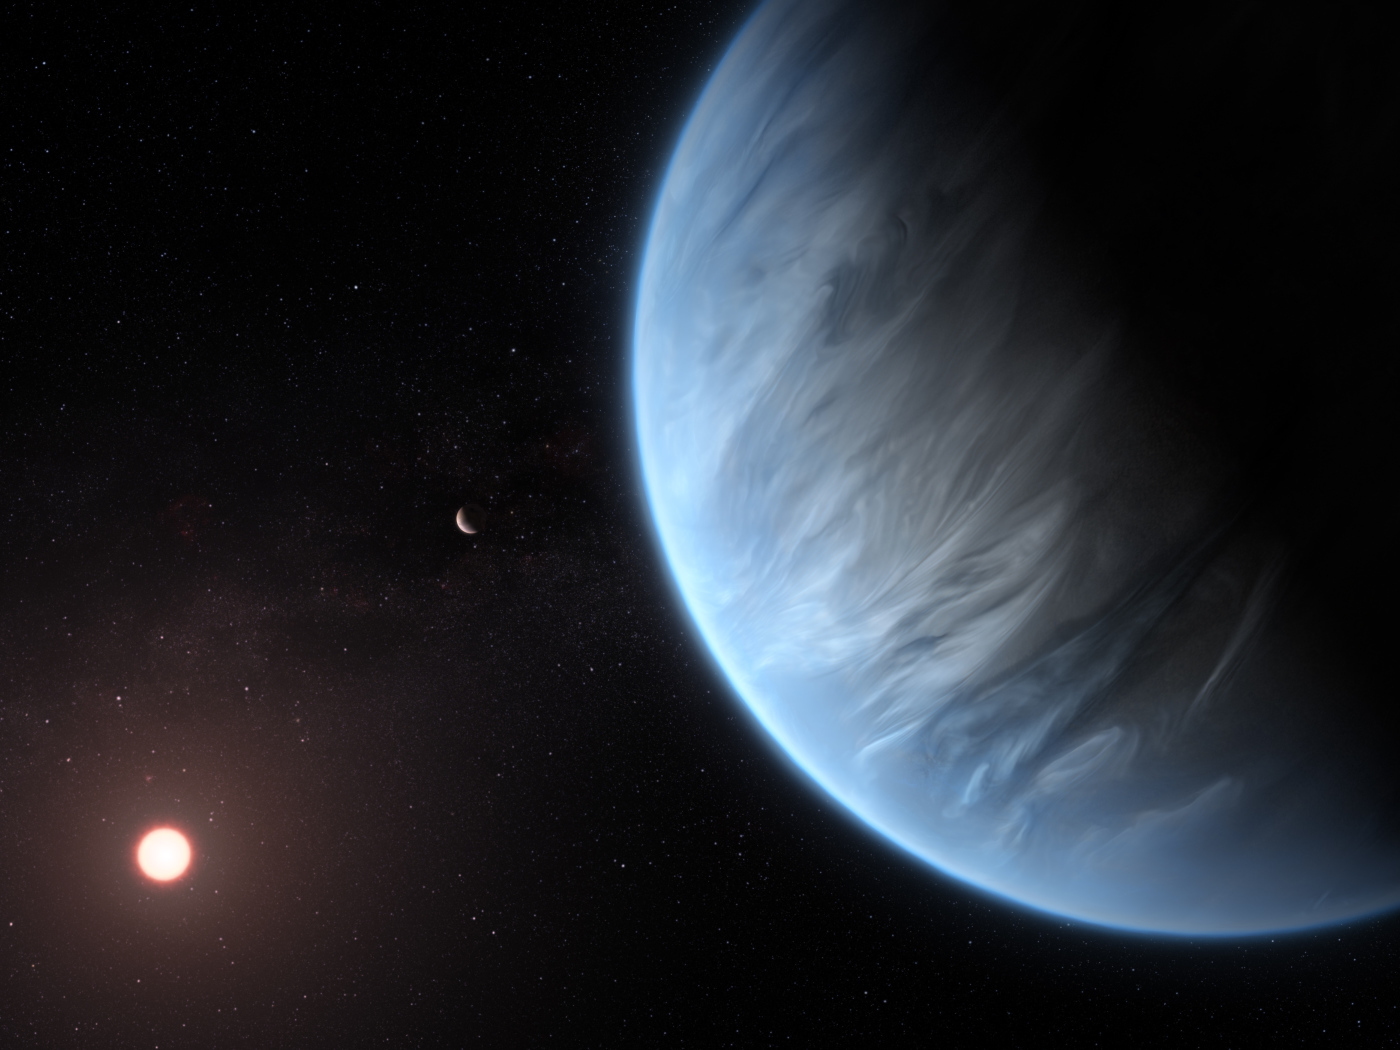 View of the planet in black space